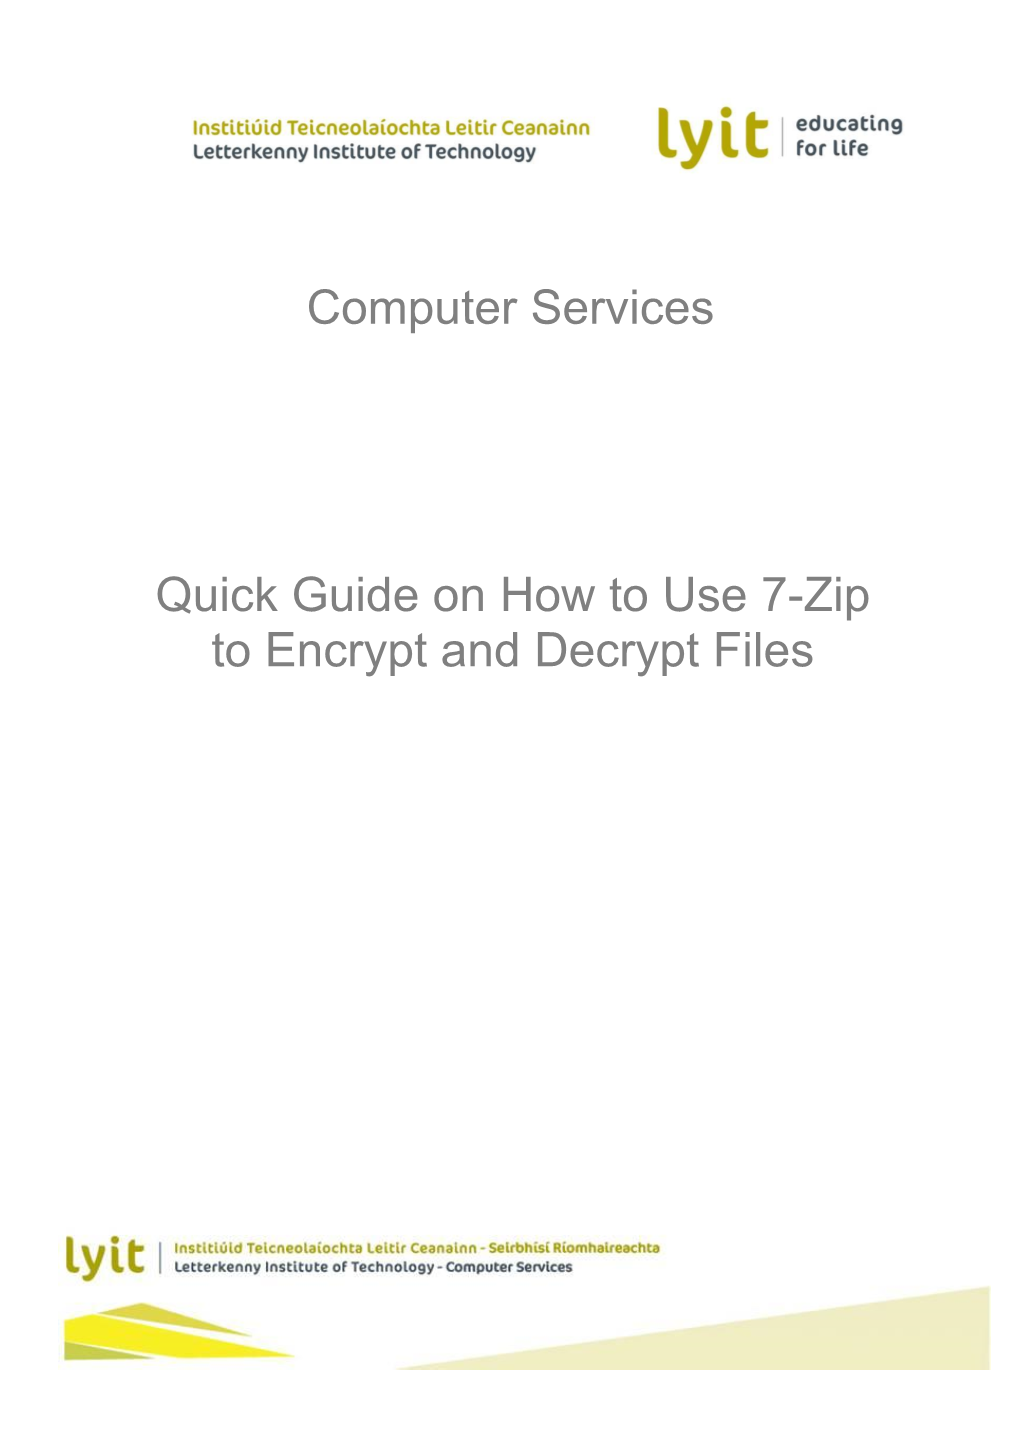 Guideline for 7-Zip Encryption